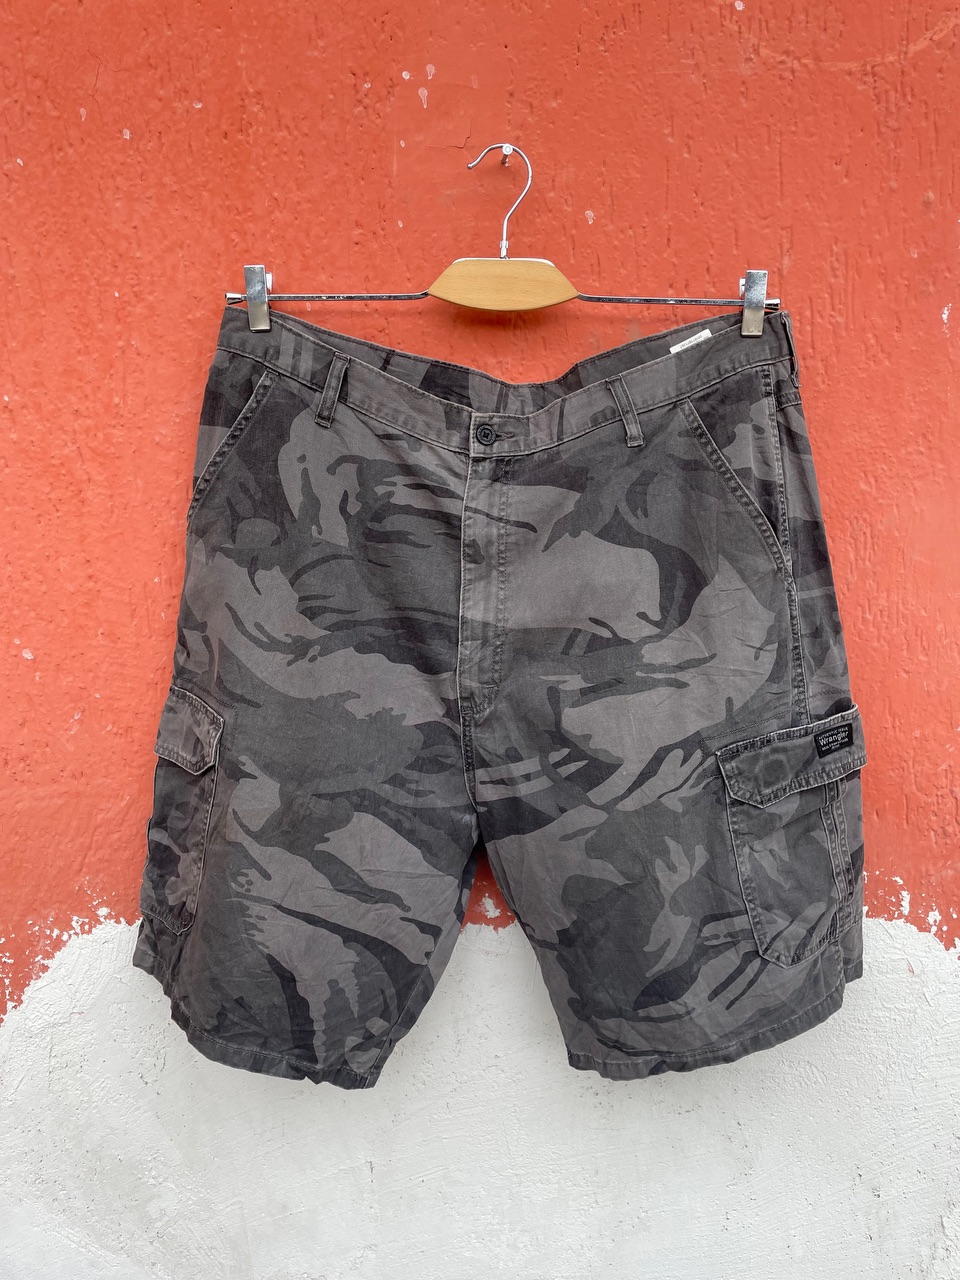 Branded cargo and chino shorts - 20 pieces